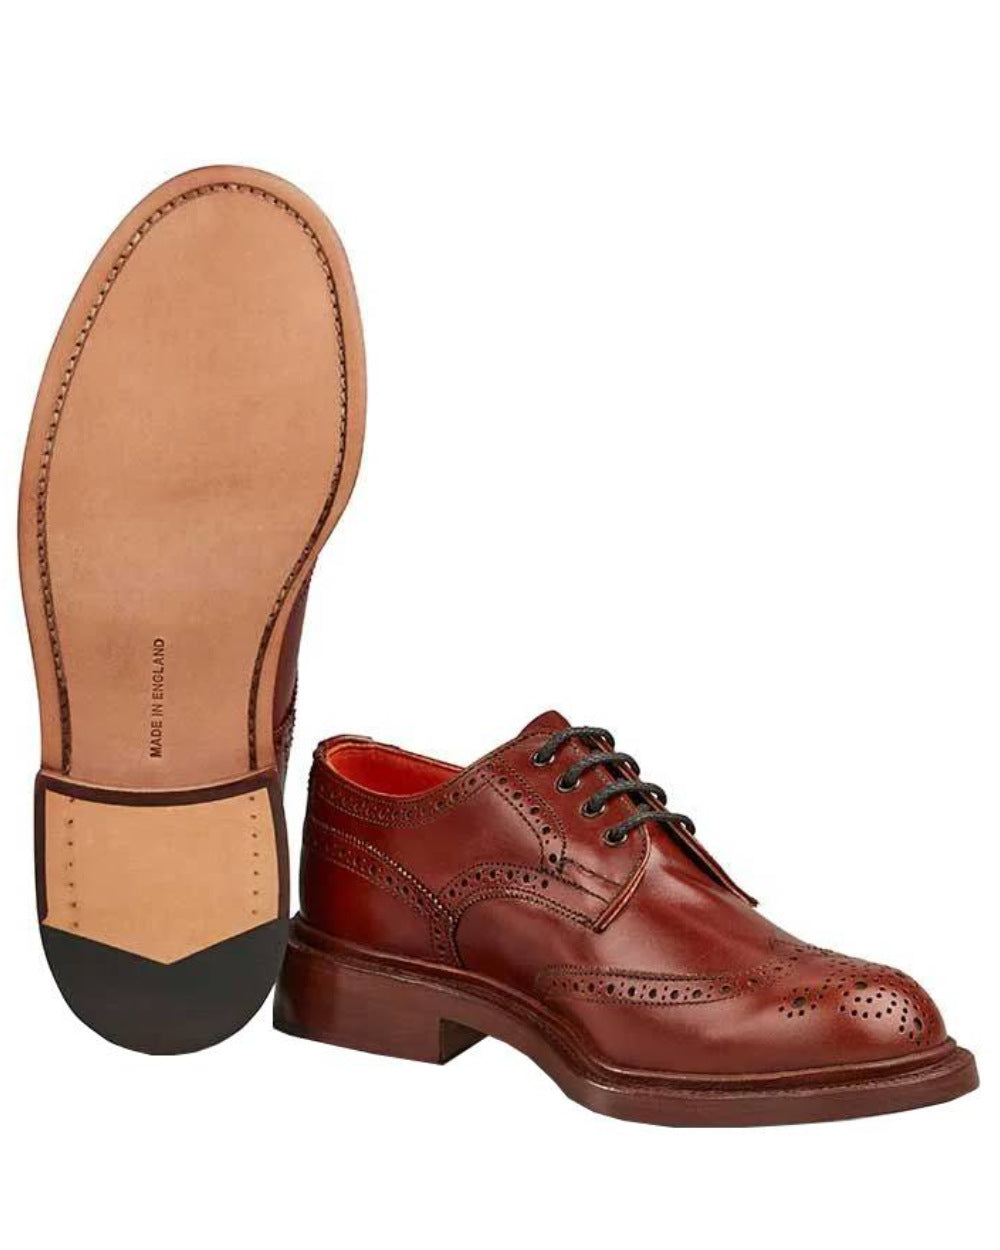 Marron Antique Coloured Trickers Anne Leather Sole Brogue Country Shoe On A White Background 